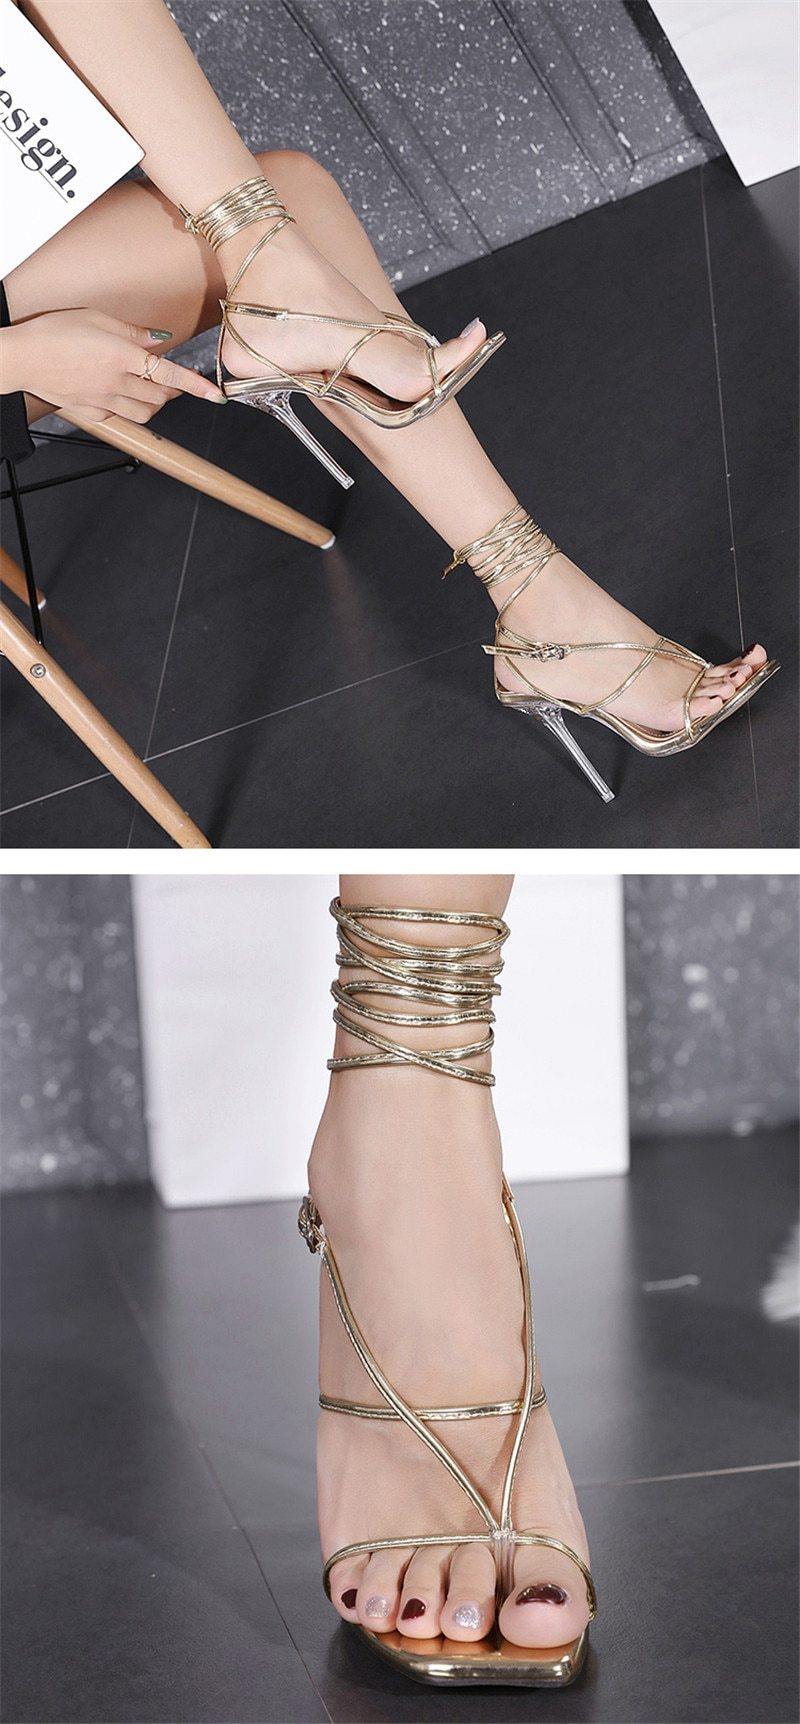 Extra Elegant Ankle Strappy Party High Heels - AM APPAREL